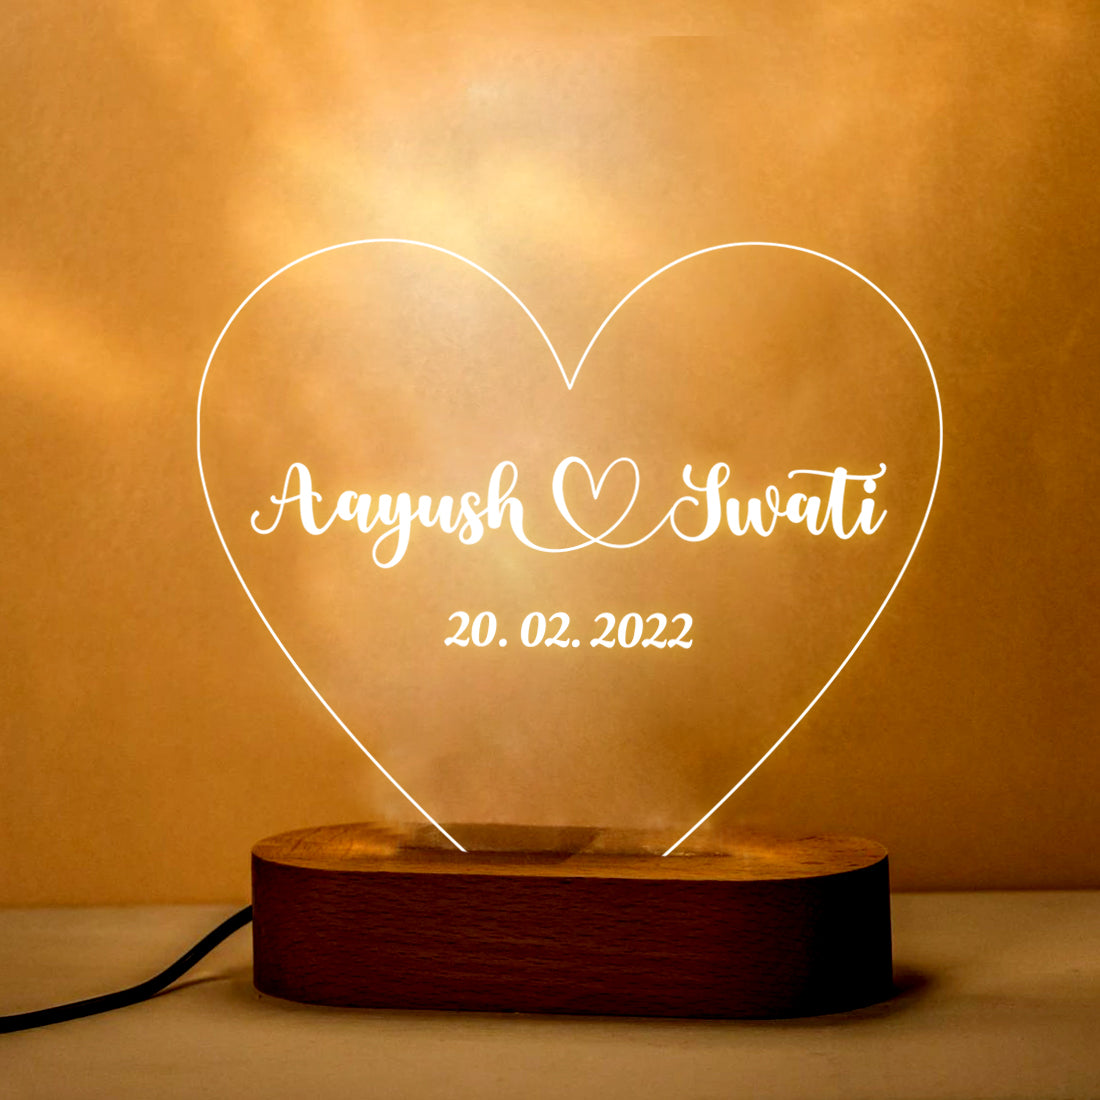 Customized Night Lamp for Couples Anniversary Gift Ideas - Heart